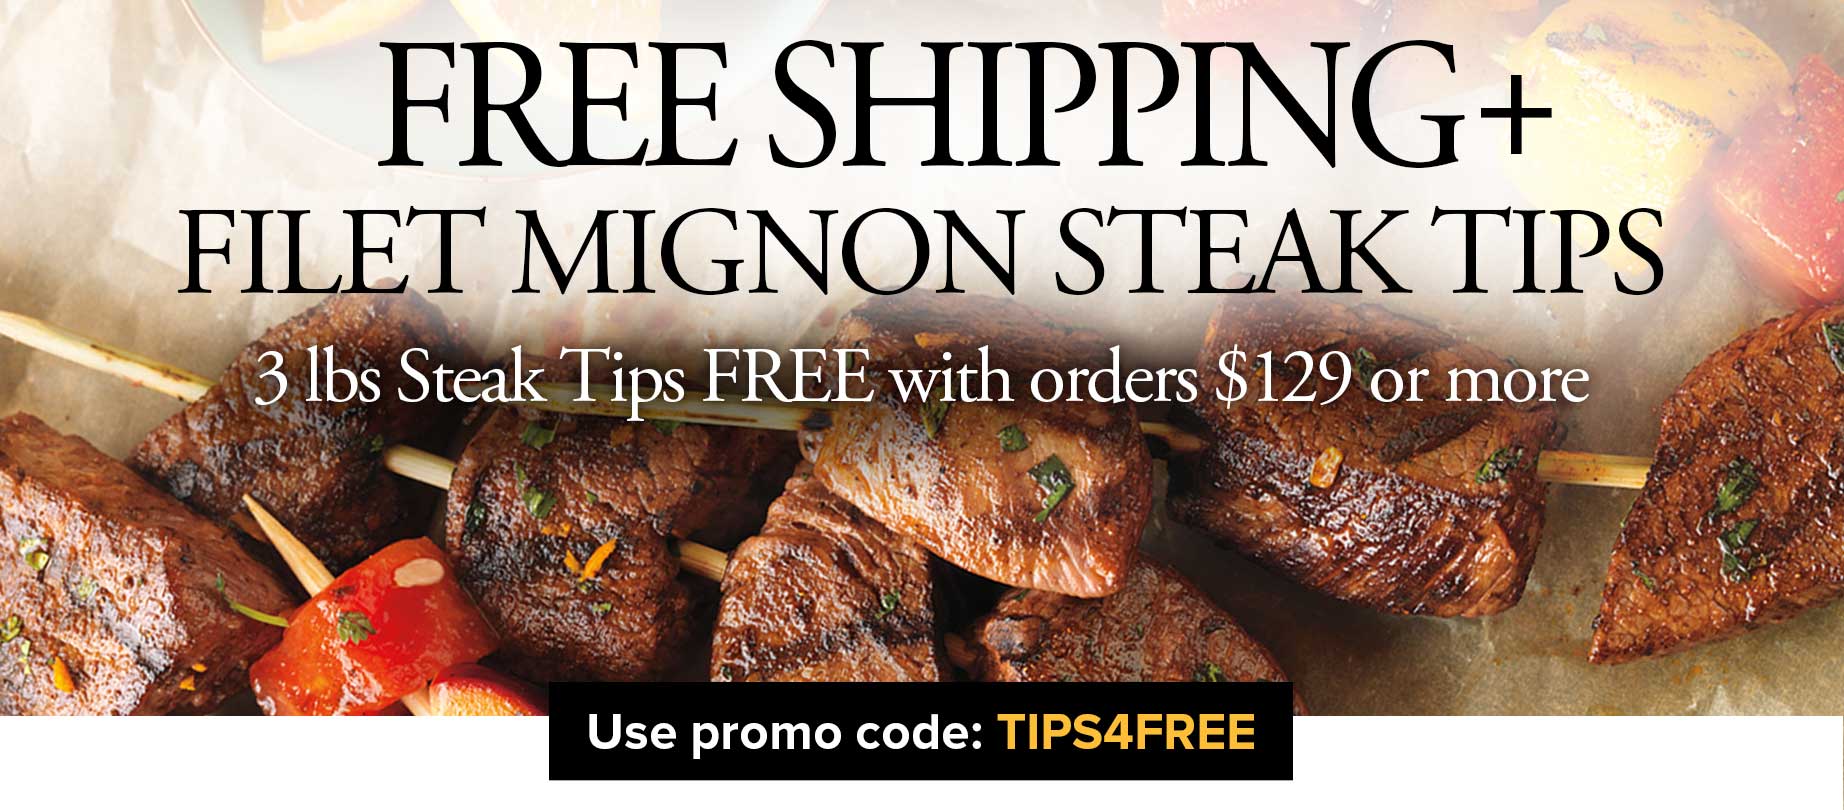 Free Shipping plus 3 lbs Filet Mignon Steak Tips with orders $129+ Use Promo Code TIPS4FREE